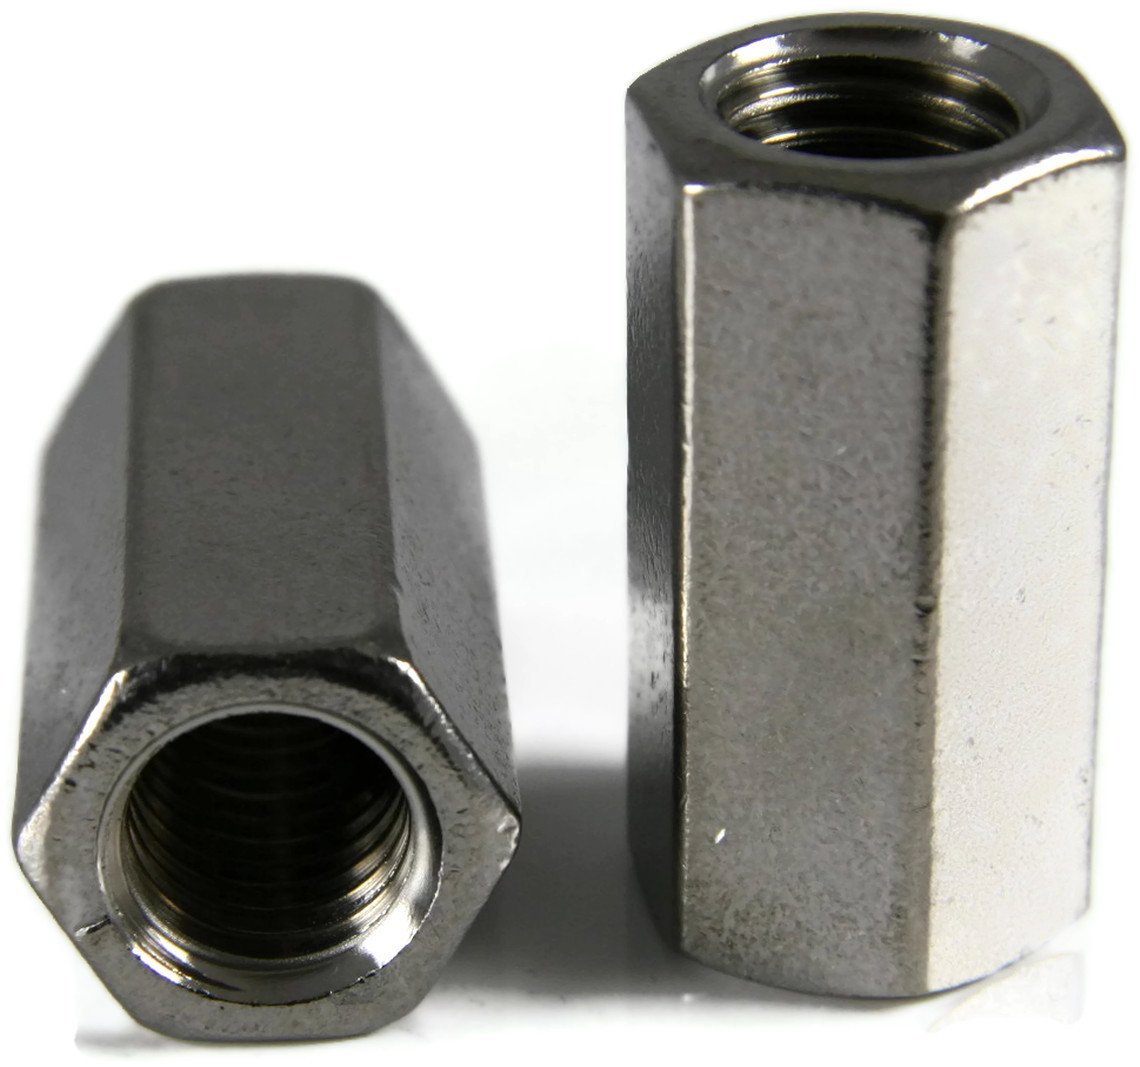 The Various kinds of mounting bolts